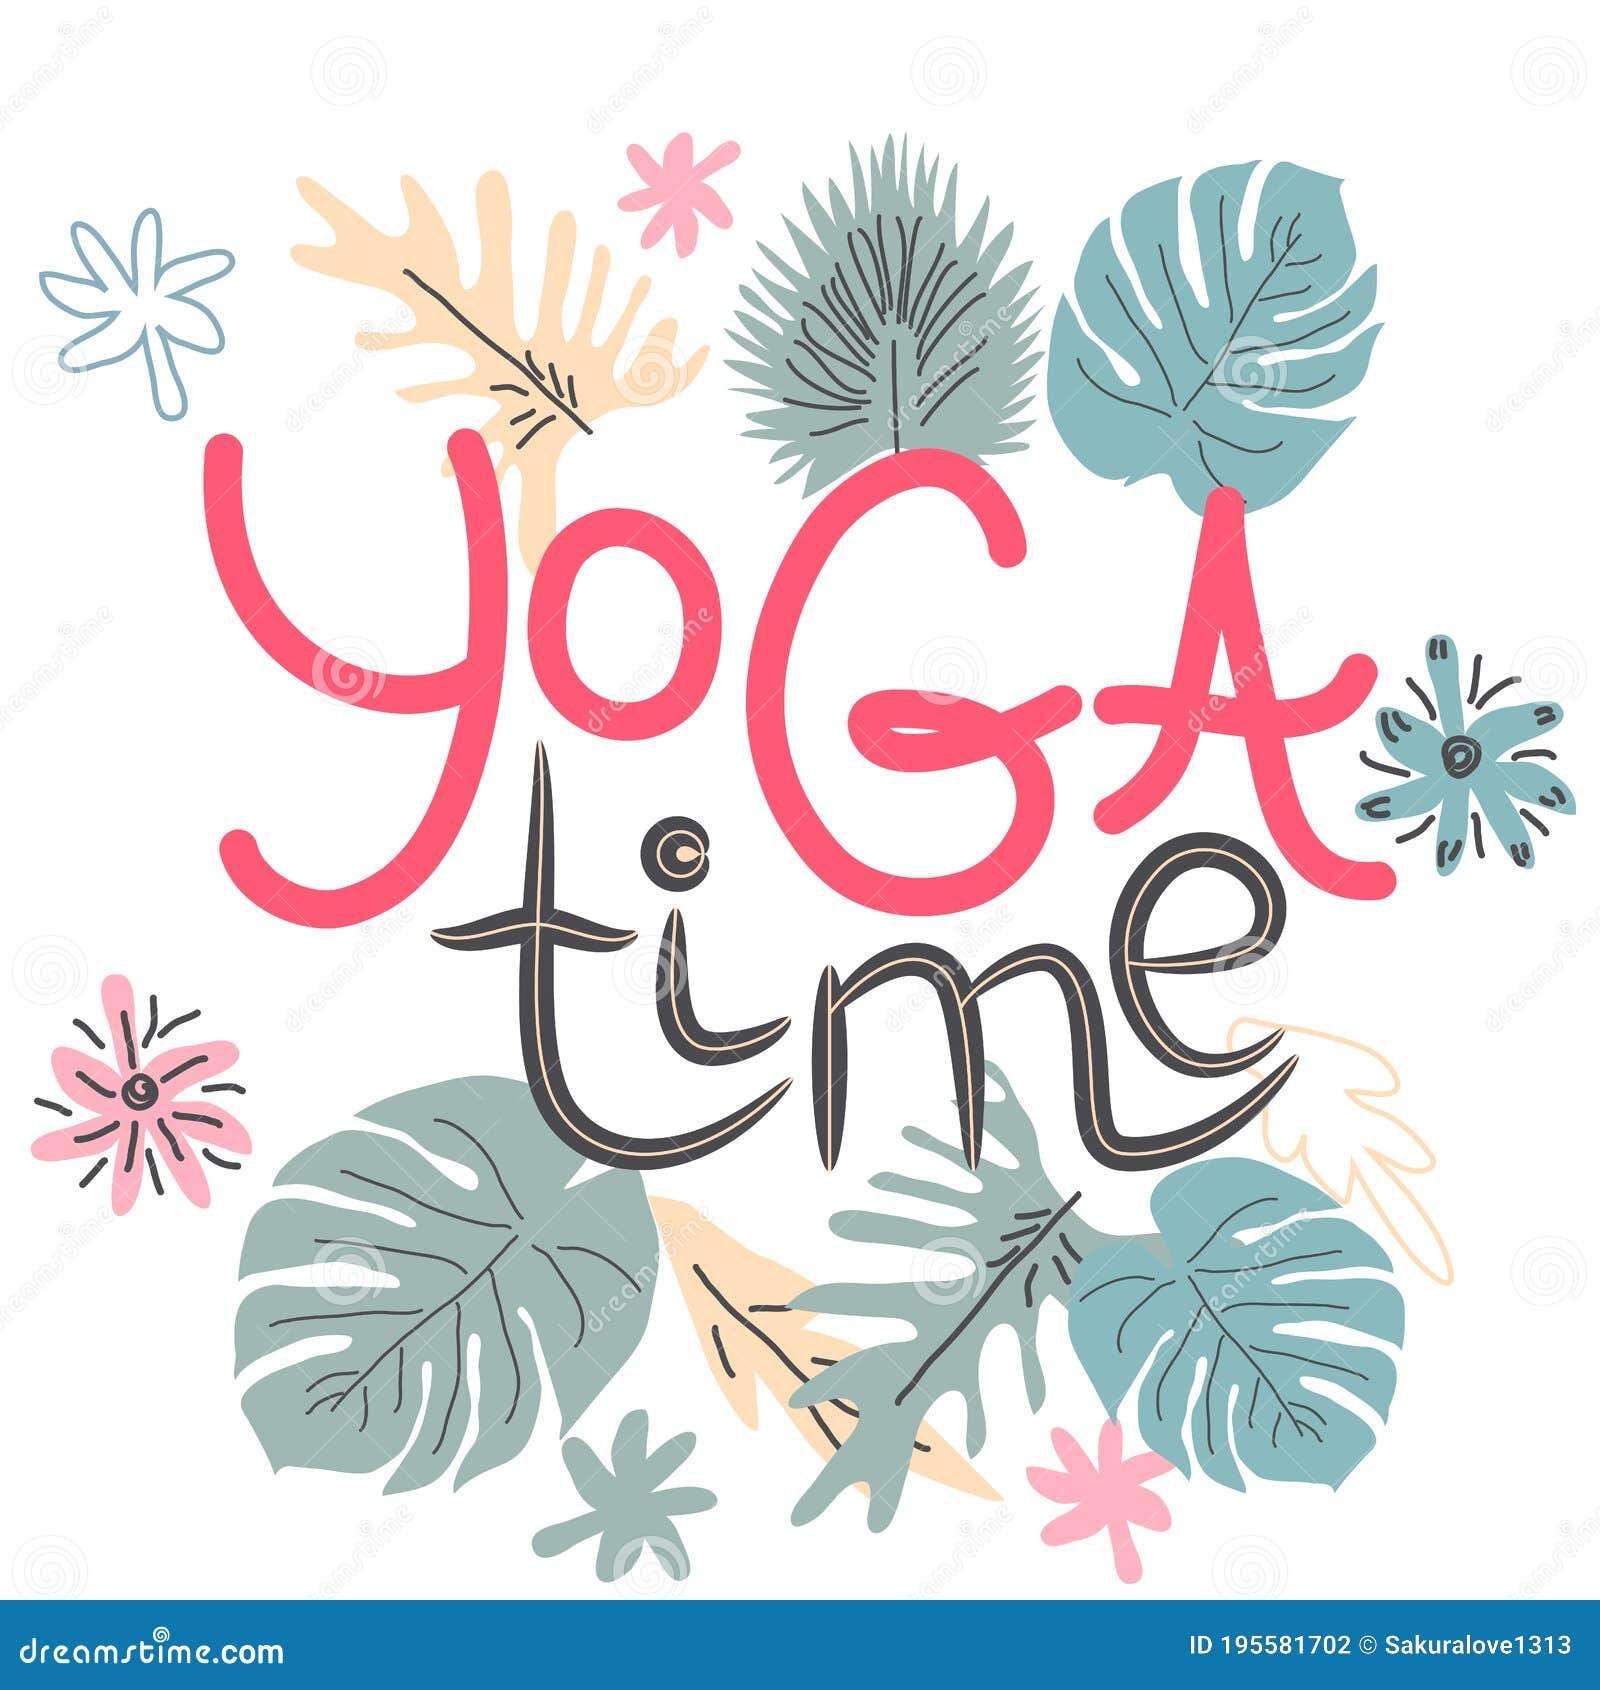 Yoga Time Inscription, Quote about Yoga of Life, Hand Lettering Phrase Decorated with Leaves and Flowers Stock Illustration - Illustration of banner, 195581702